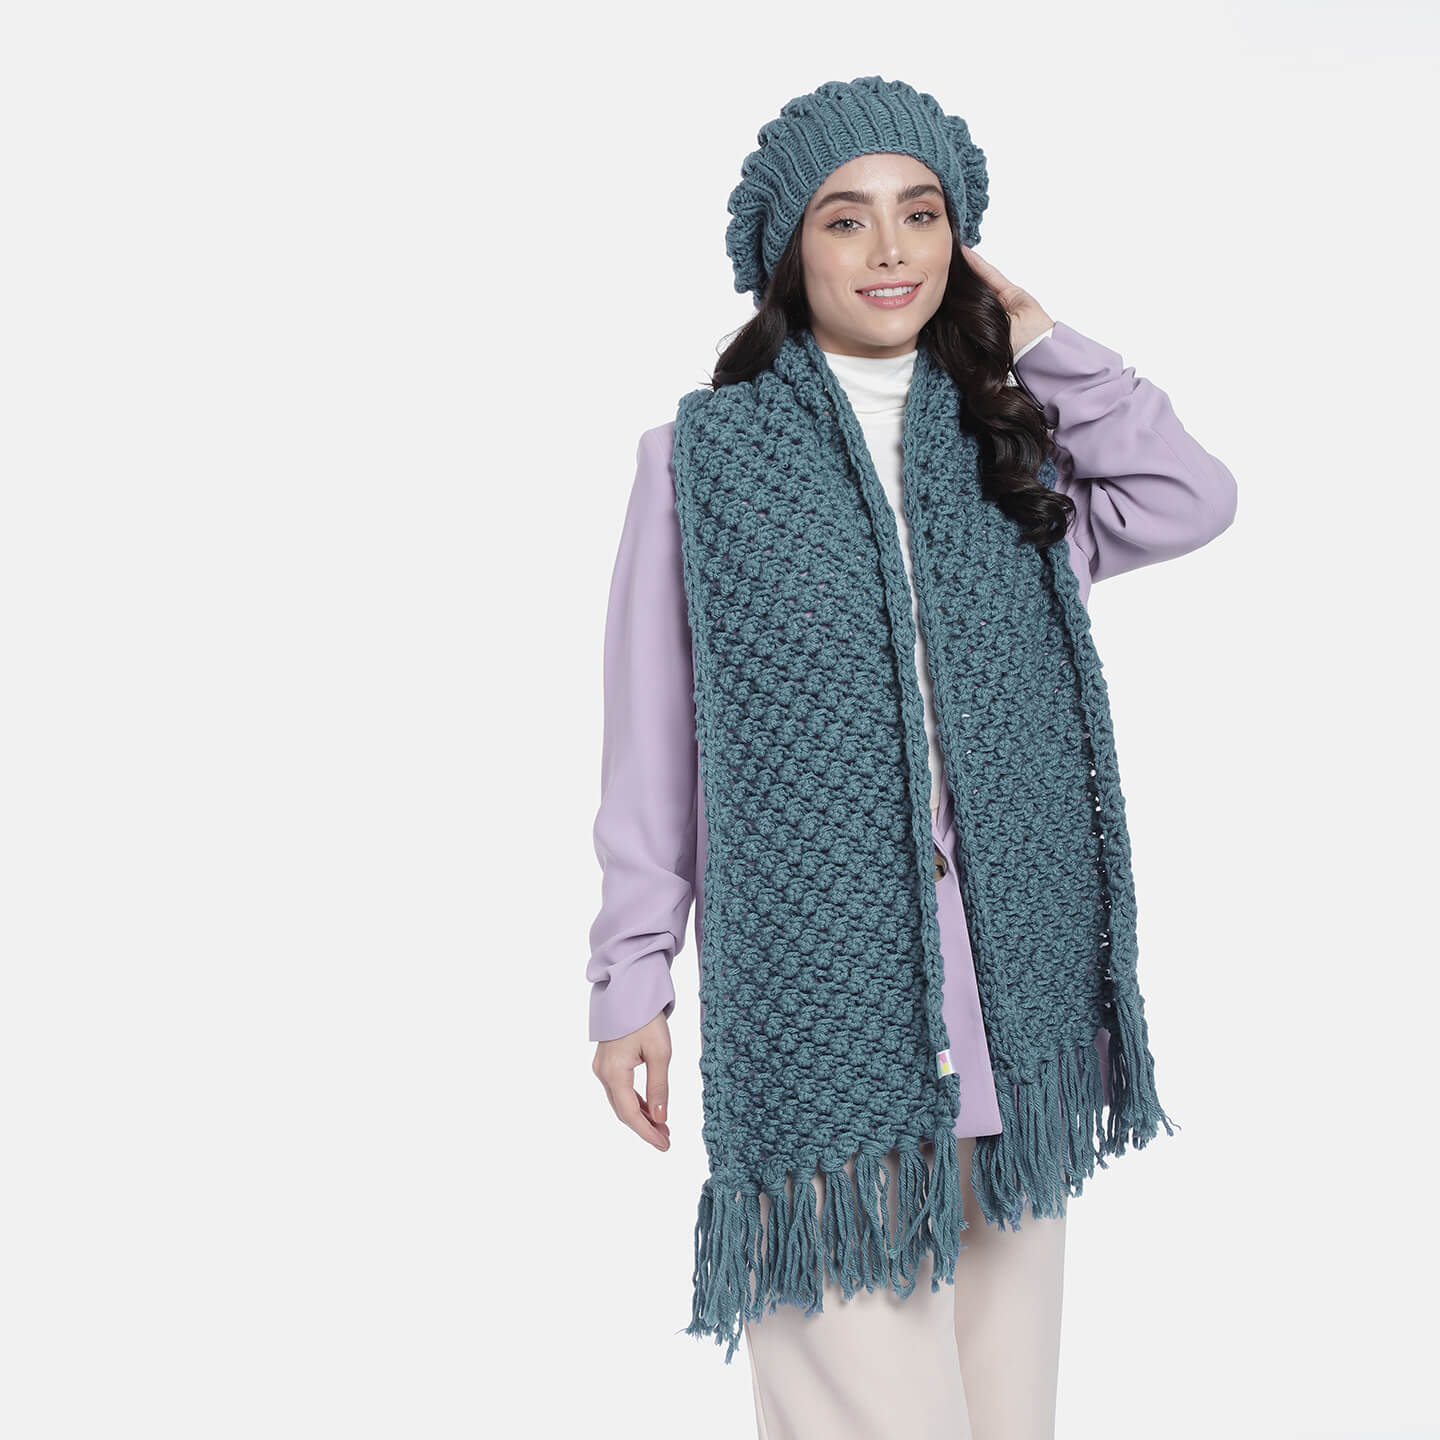 Beanie and Scarf Coordinating Set - 3168